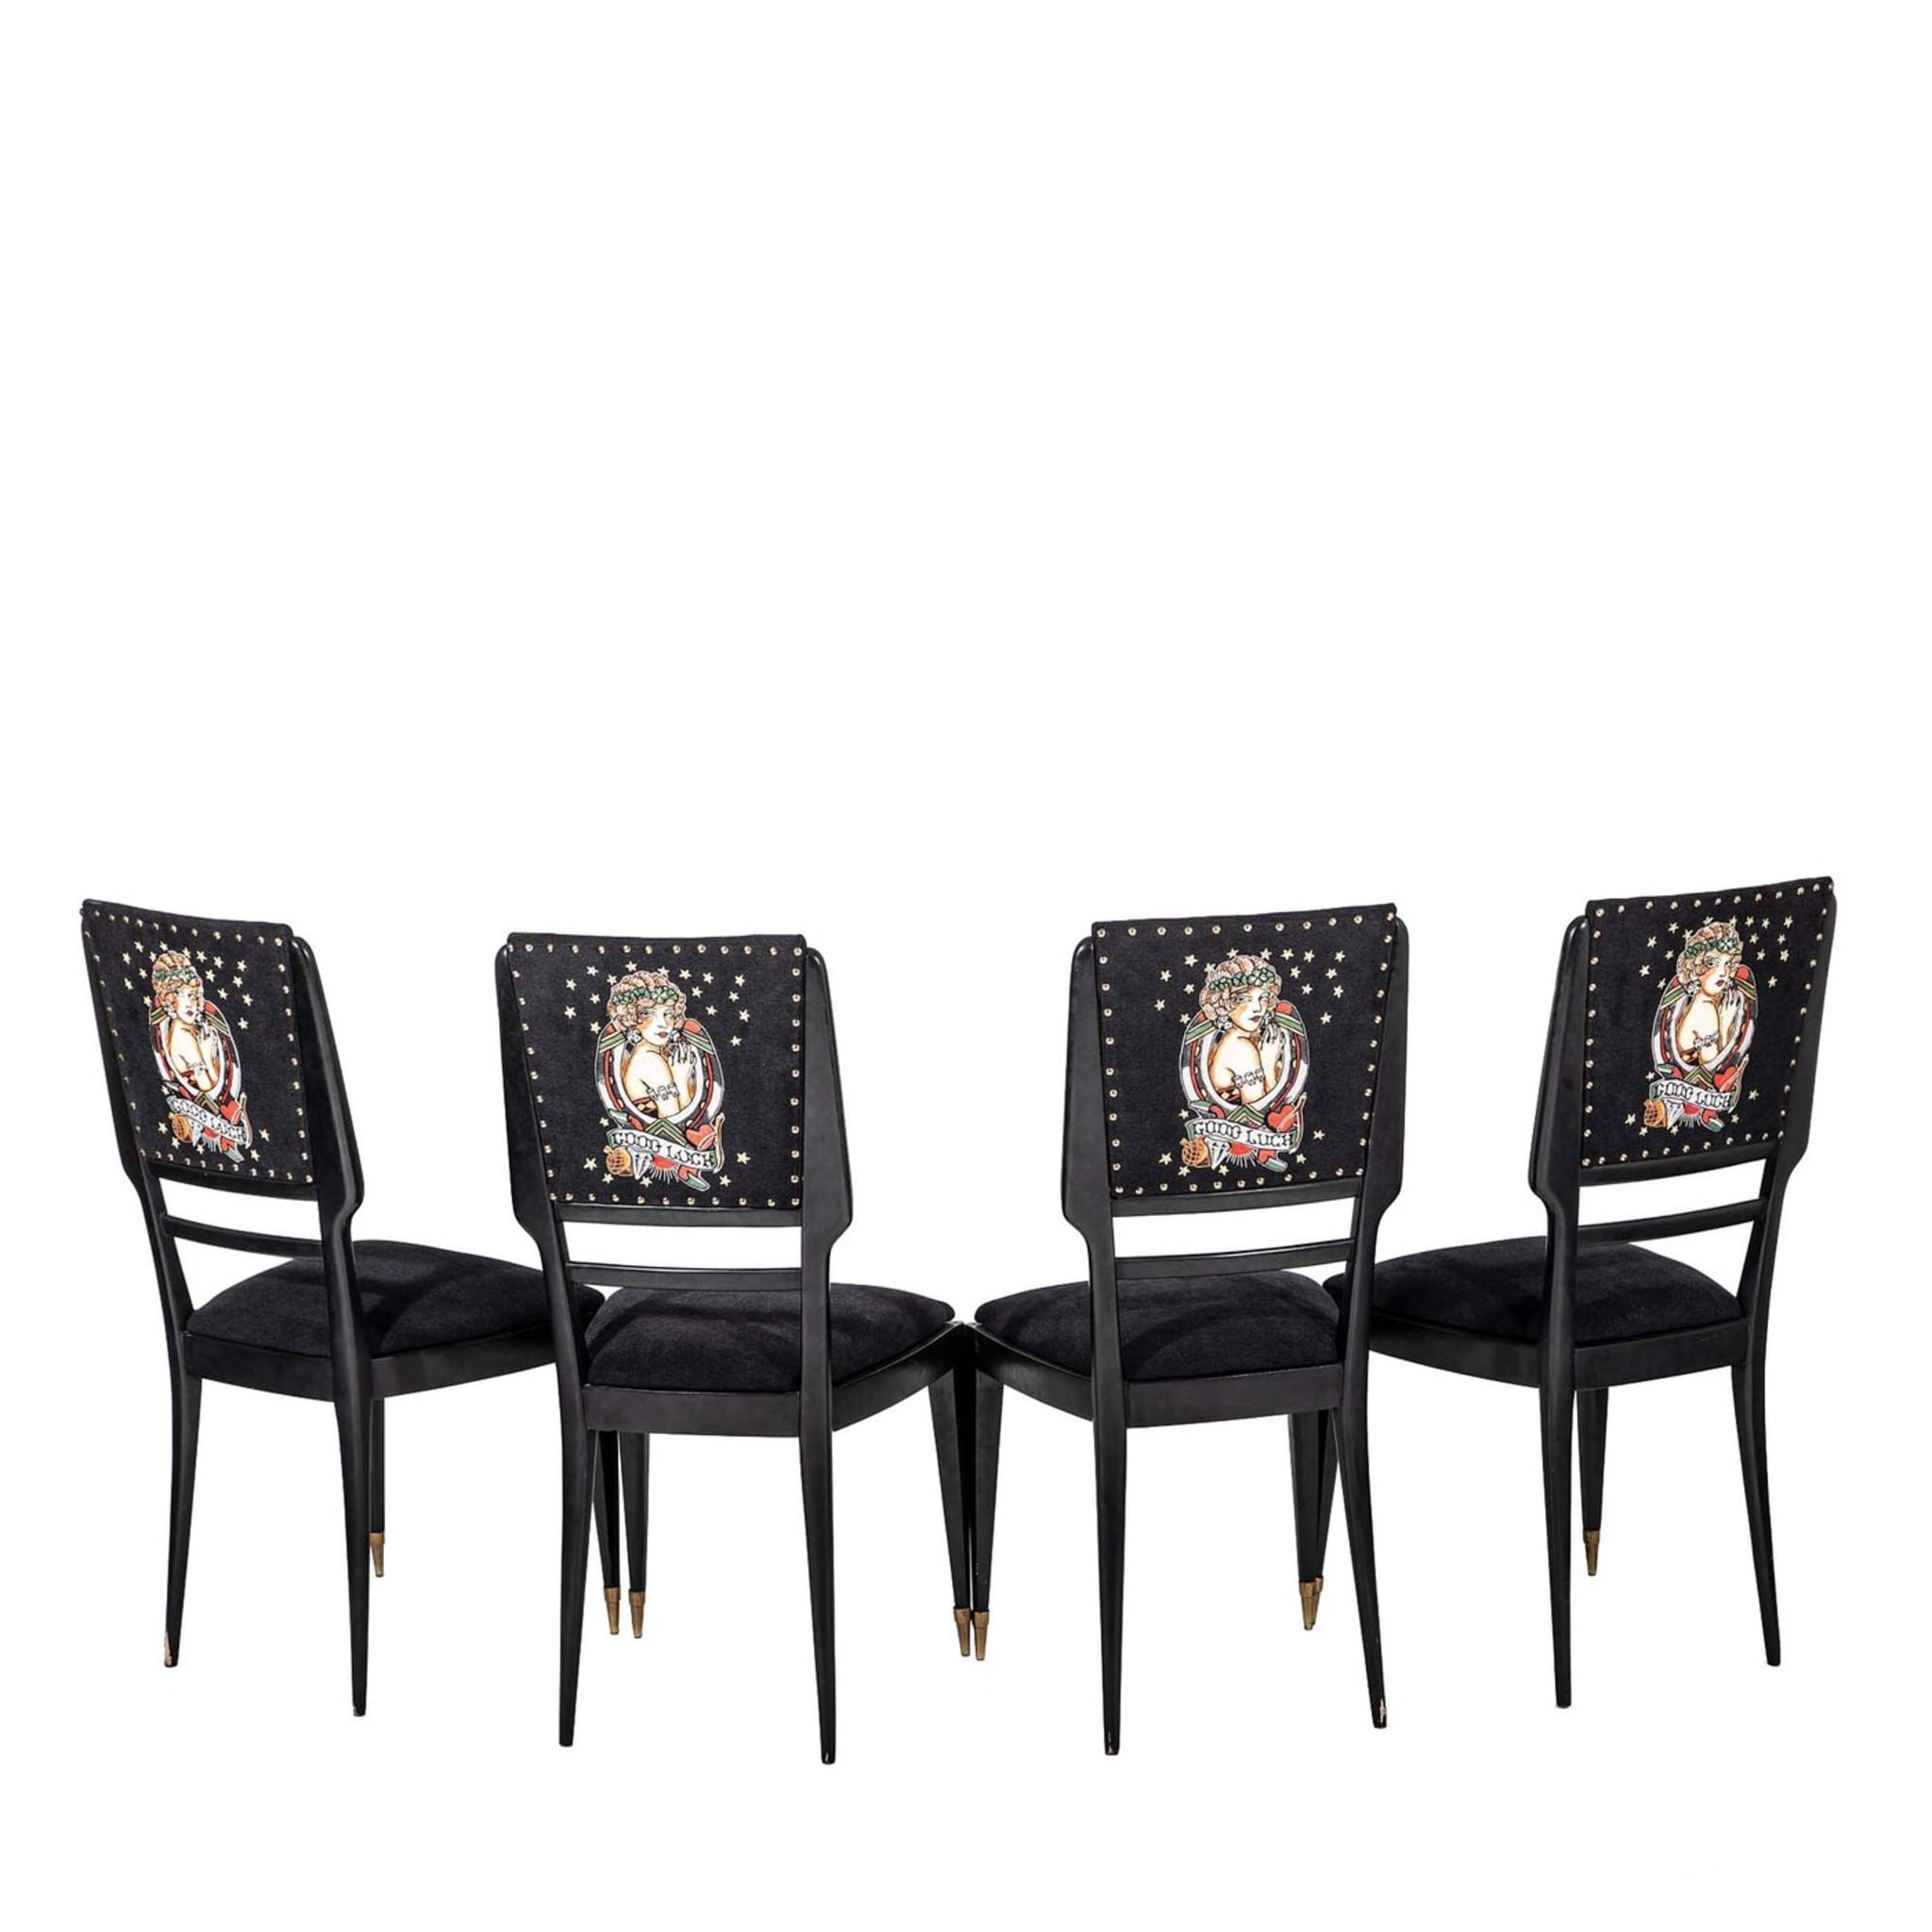 Set of 4 Old School Sailor Jerry Dining Chairs - Main view